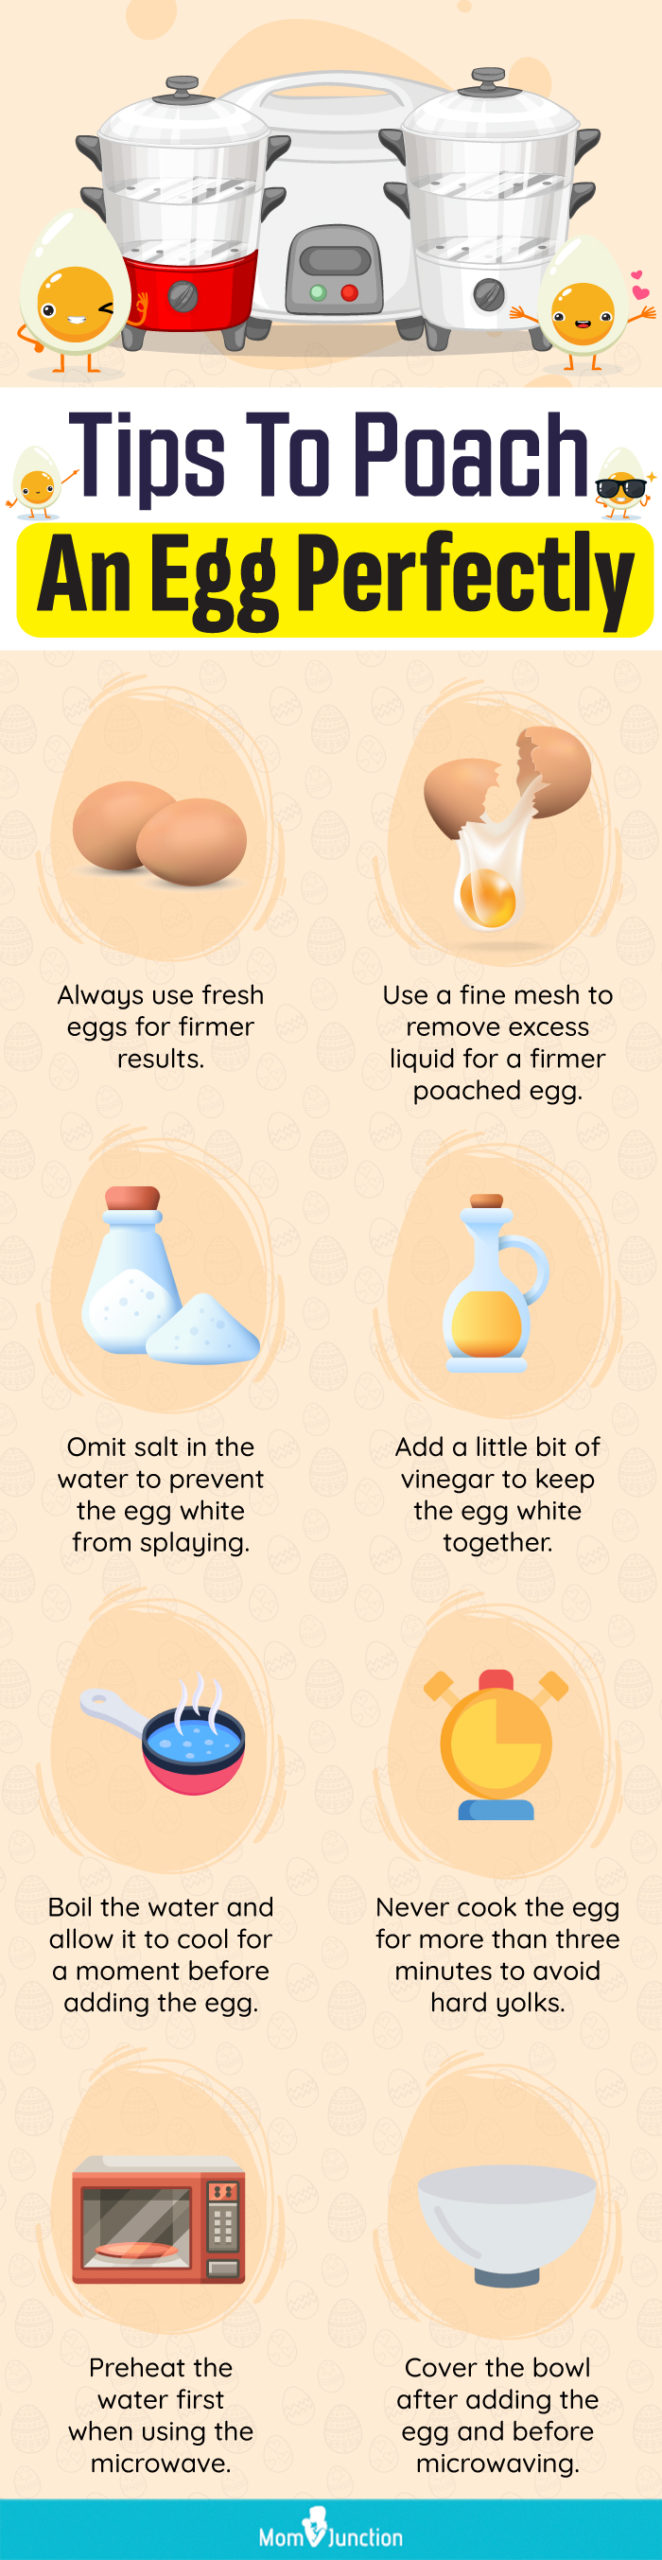 Tips To Poach An Egg Perfectly (infographic)